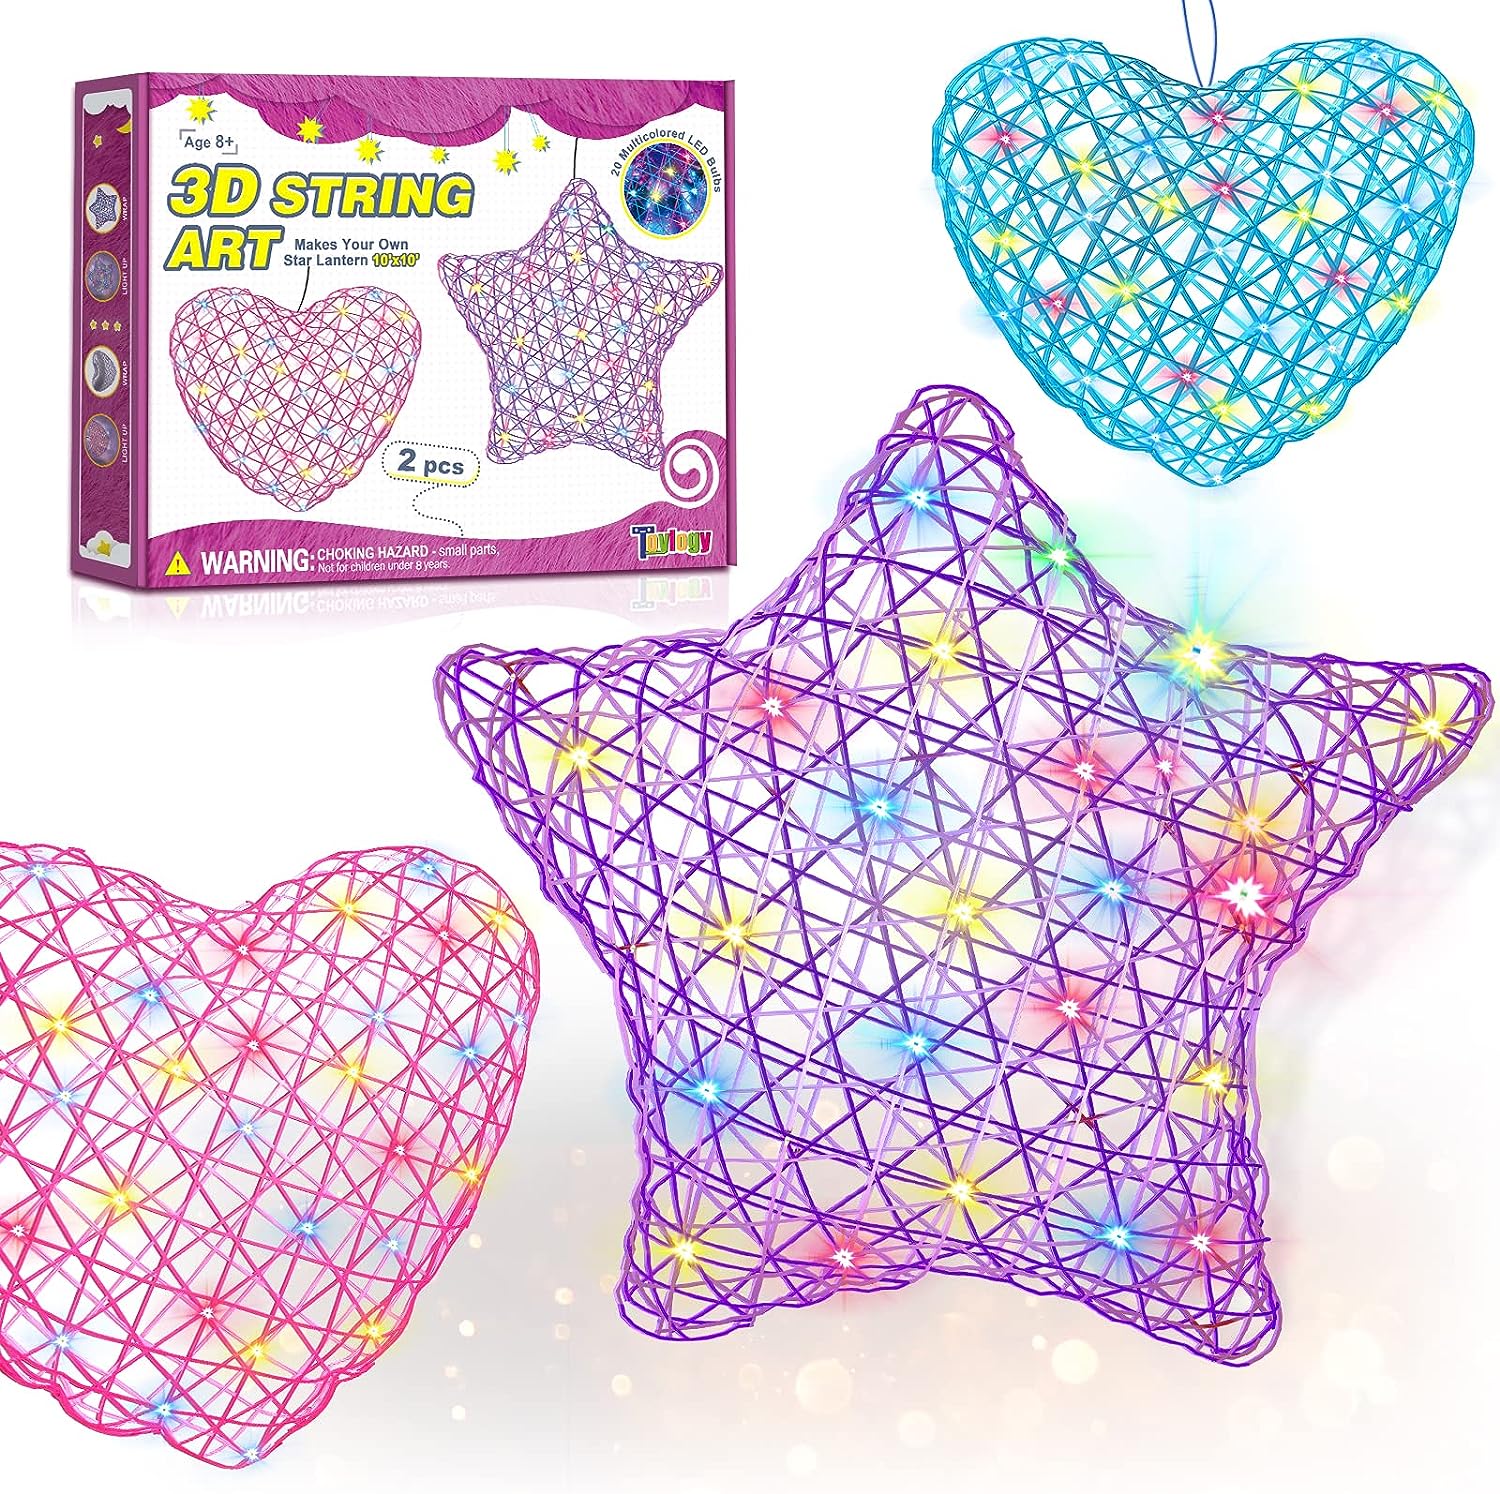 3D String Art Craft Kits for Kids Teen Girl Gifts for 8 9 10 11 12 Year Old Girl Toys, Arts and Crafts for Girls and Boys Ages 8-12, DIY Lantern Gifts for Teenage Girls